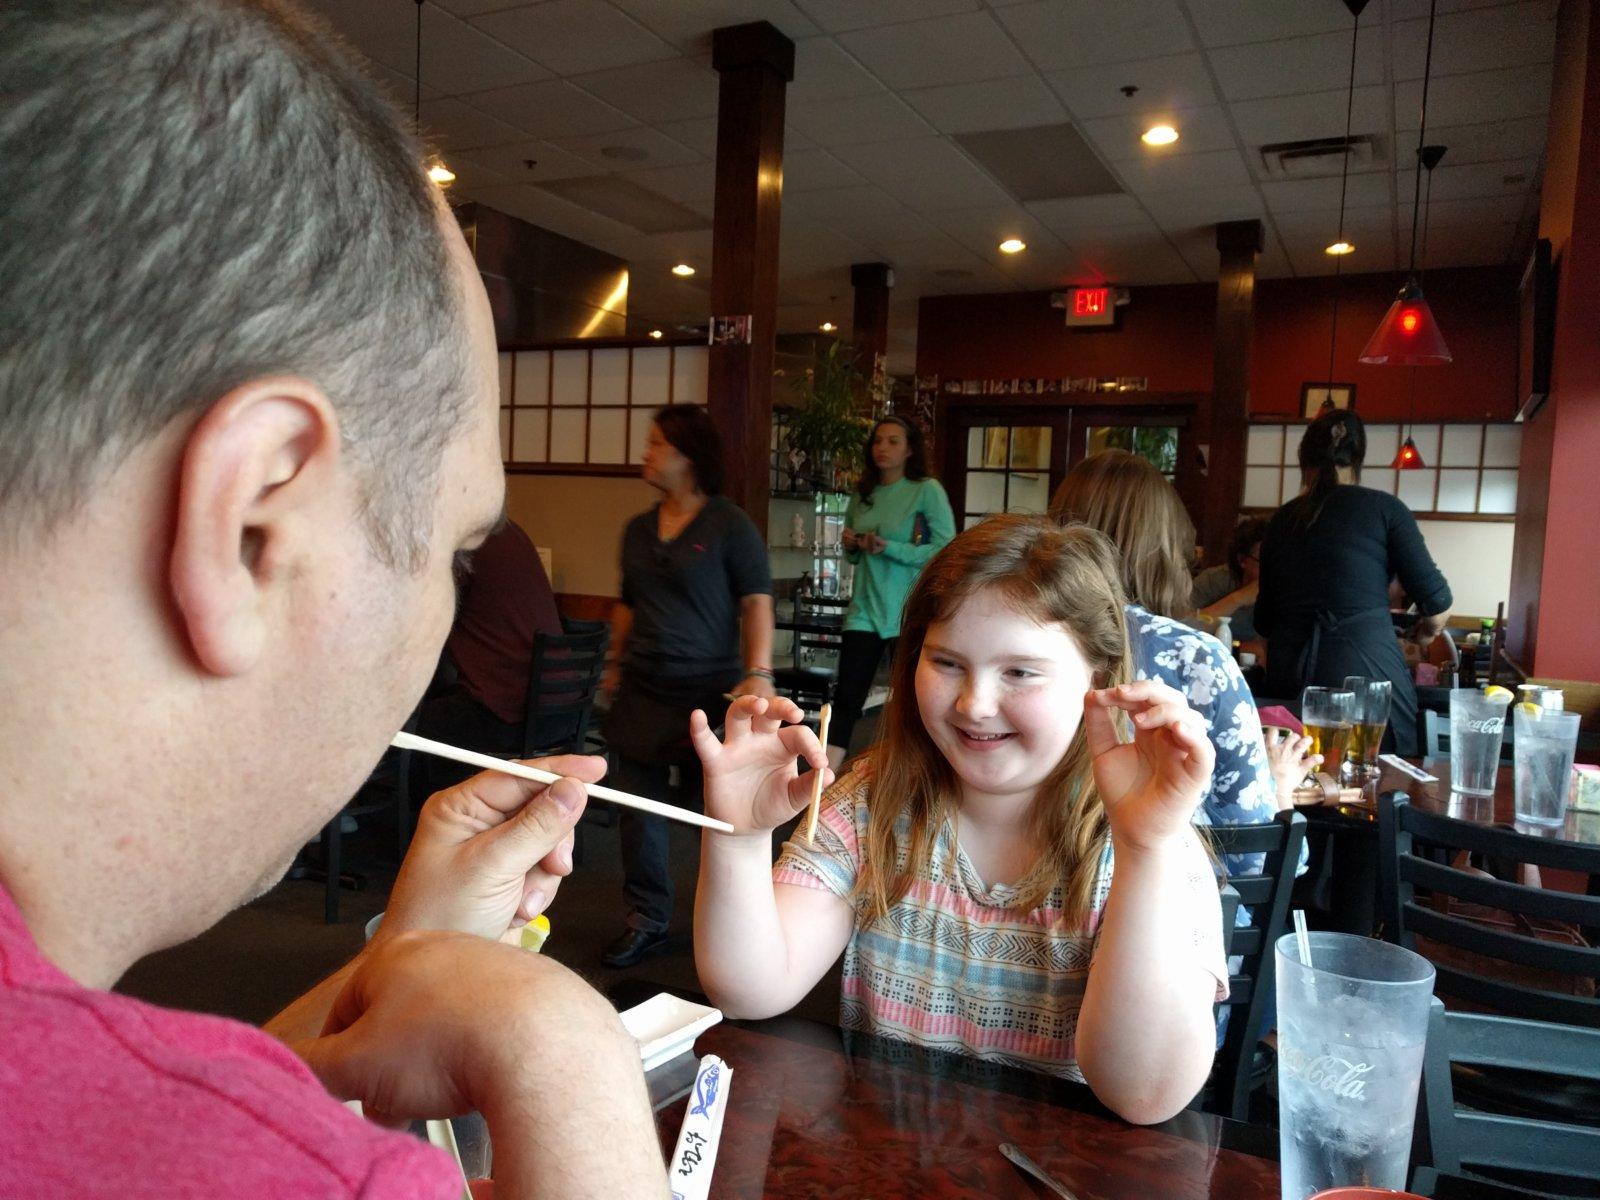 Learning to use the chopsticks.